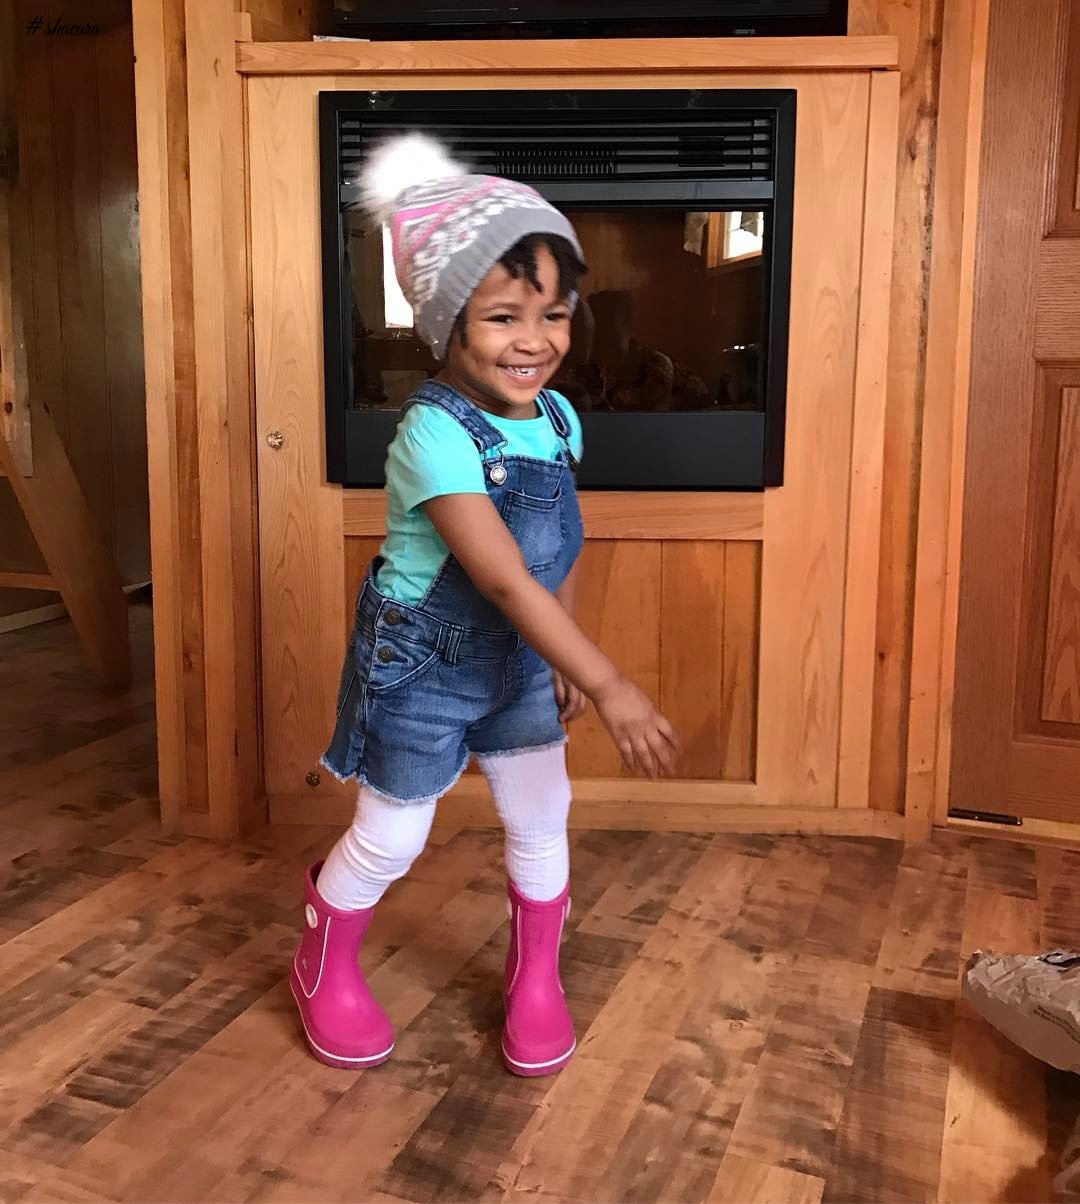 CUTE KIDDIES’ OUTFITS YOU SHOULD SEE